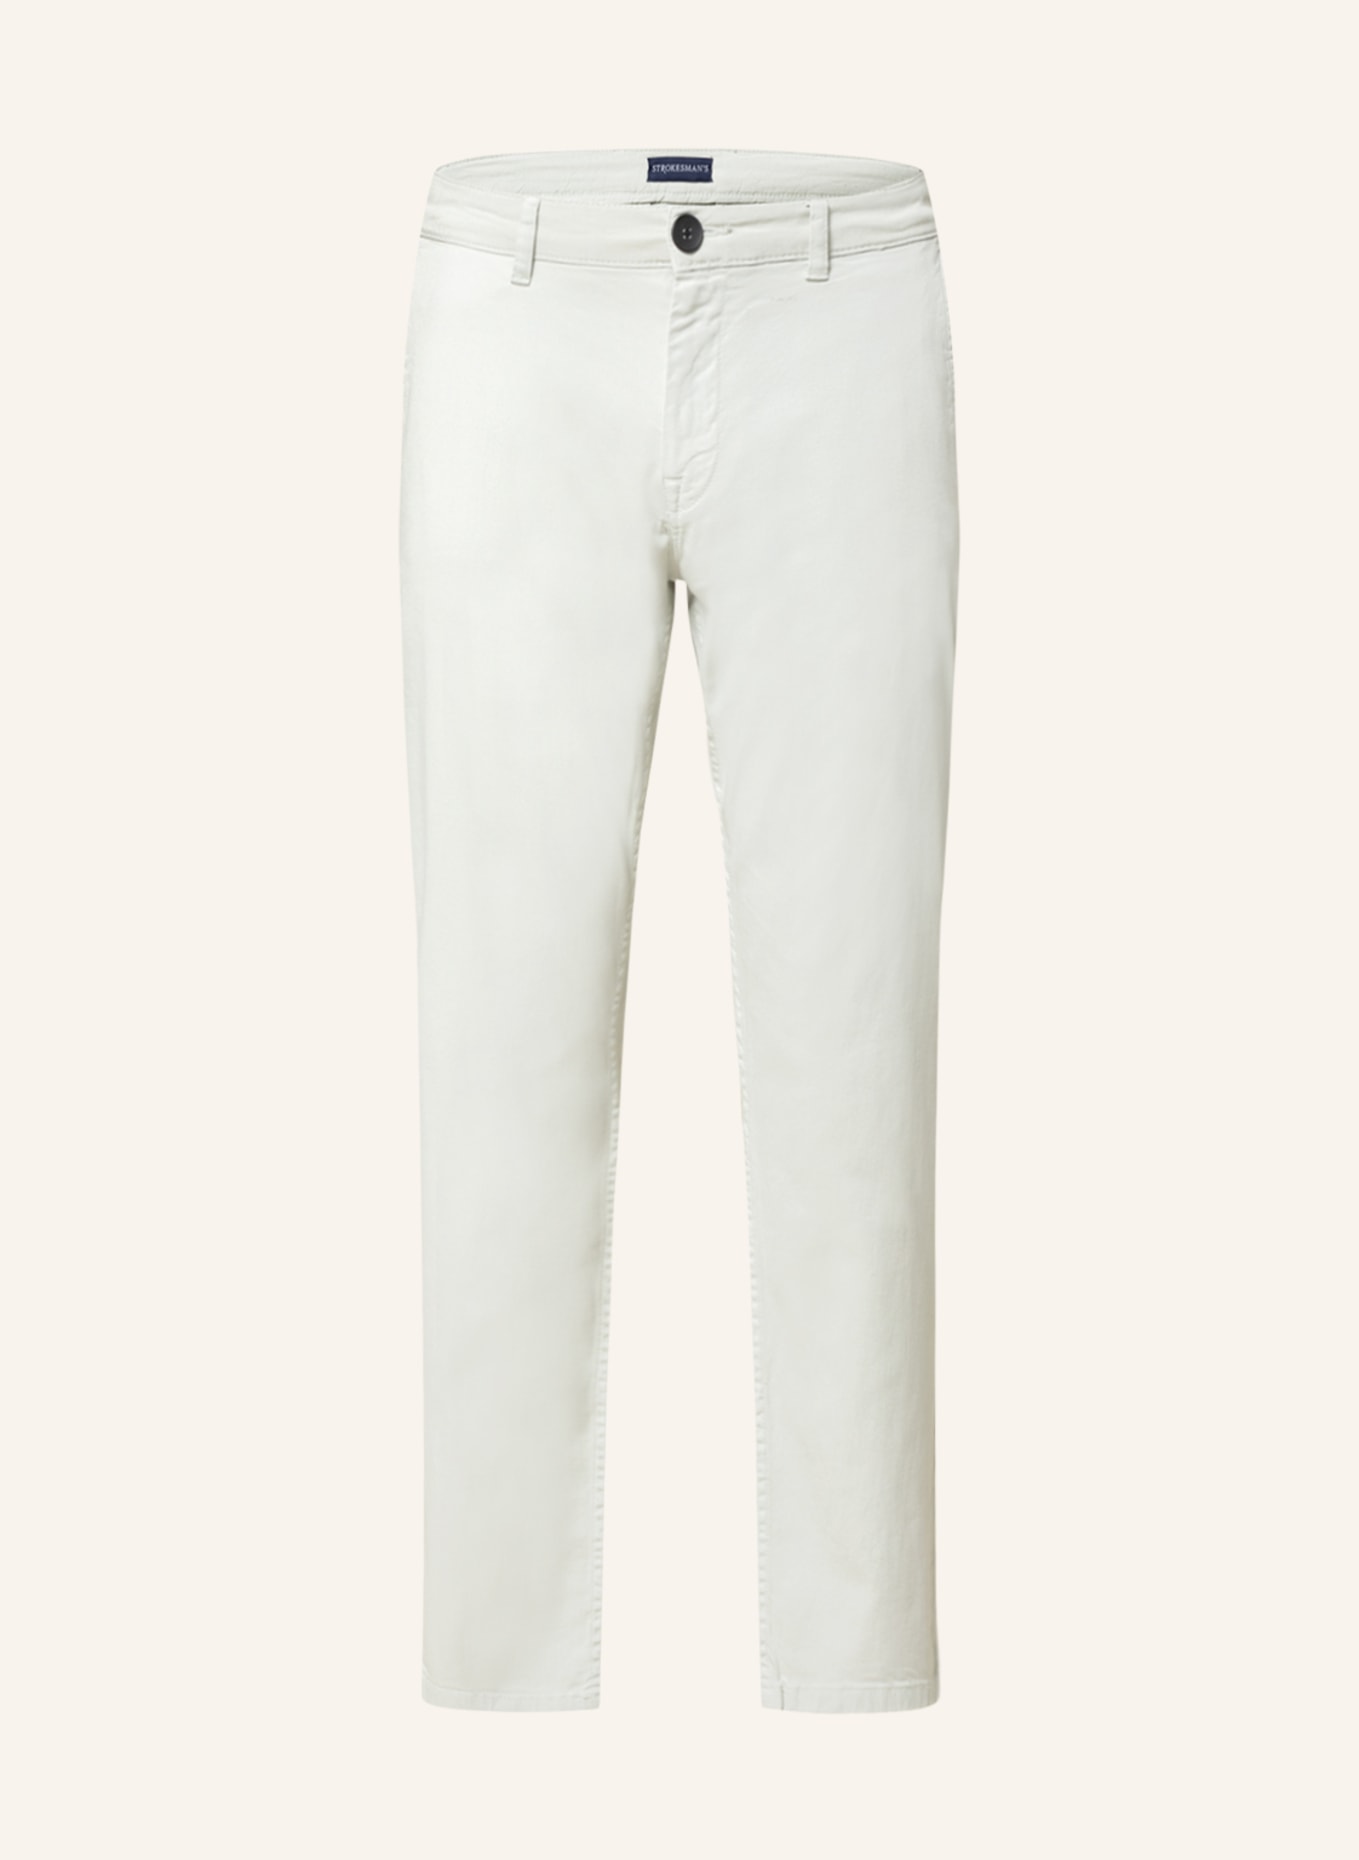 STROKESMAN'S Chinos Regular fit, Color: MINT (Image 1)